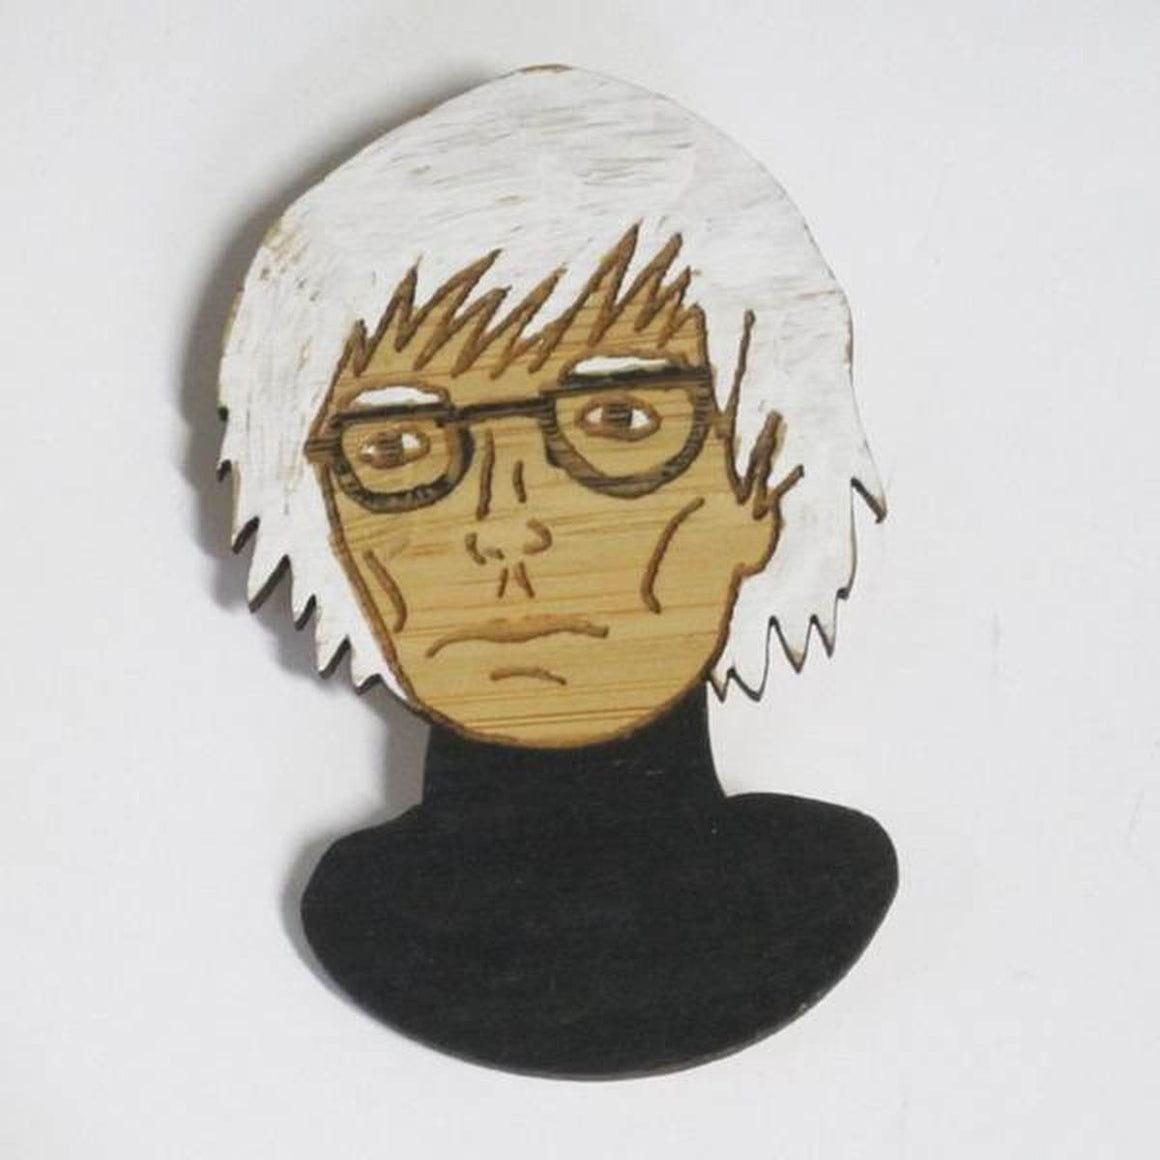 A brooch featuring a portrait of artist Andy Warhol. He is shown wearing a black turtleneck and his iconic glasses.Made from bamboo wood and hand painted.